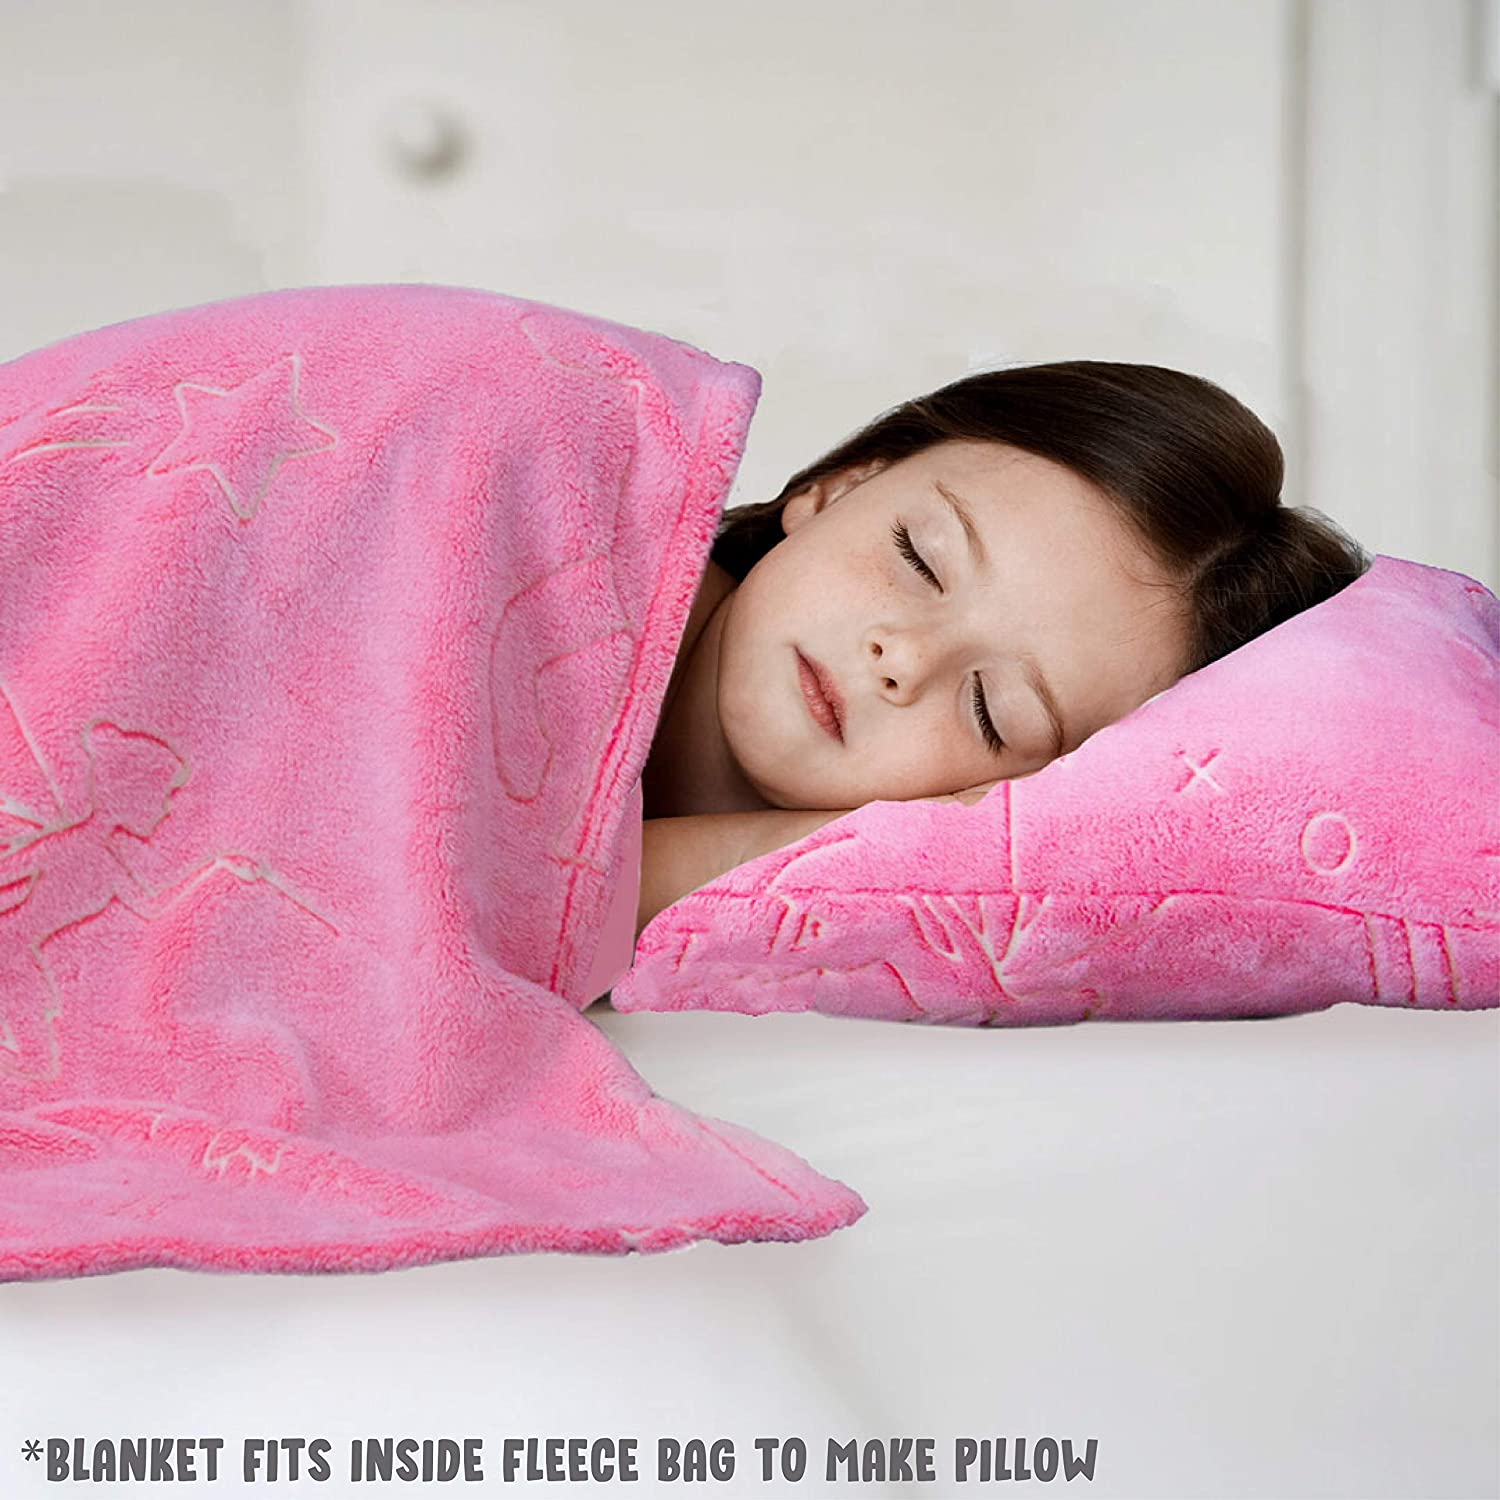 Glo-Fun Glow In The Dark Kids Space Blanket And Pillow Bag Grey 